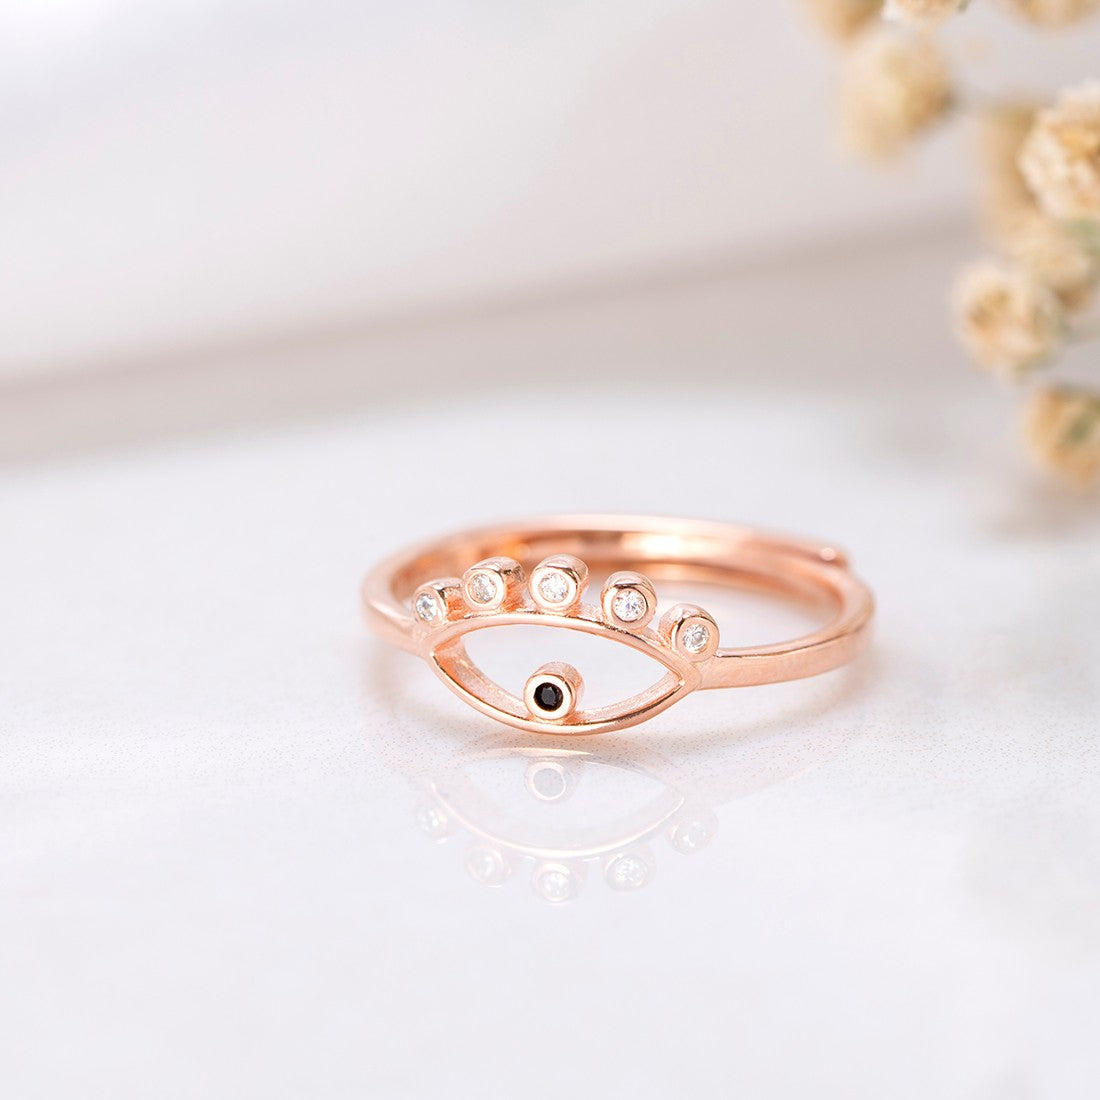 2021 New Hot Selling Gold Color Open Adjusted White Green Zirconia Paved  Tiny Evil Eye Ring Girls Fashion Wrap Dainty CZ Jewelry